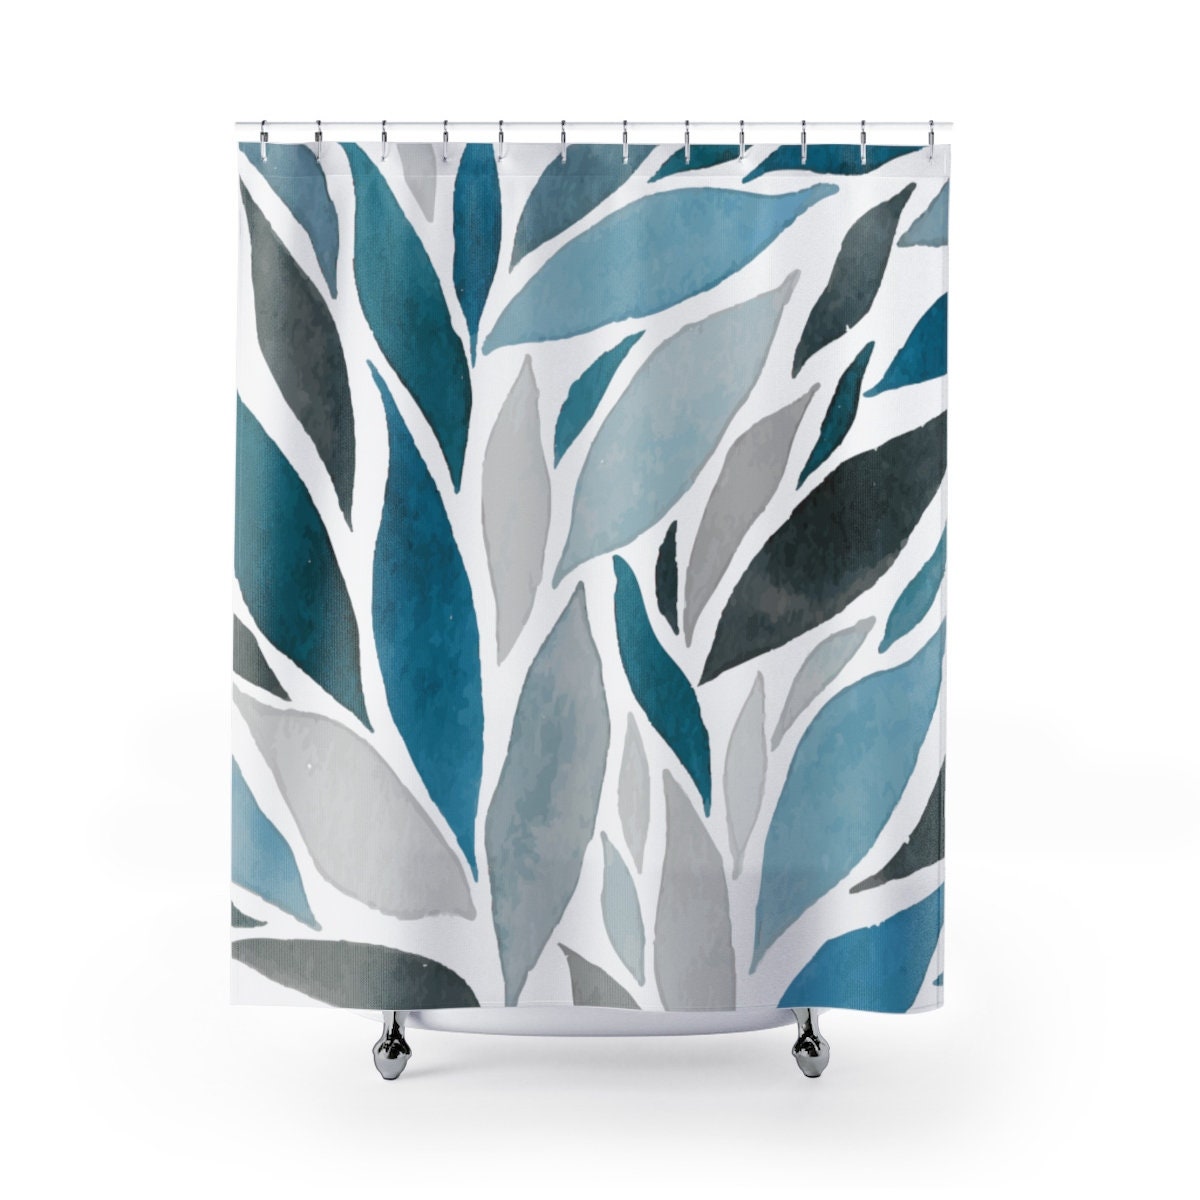 Details about   Fabric Shower Curtain Leaves Blue Gray Hooks Liner Included 